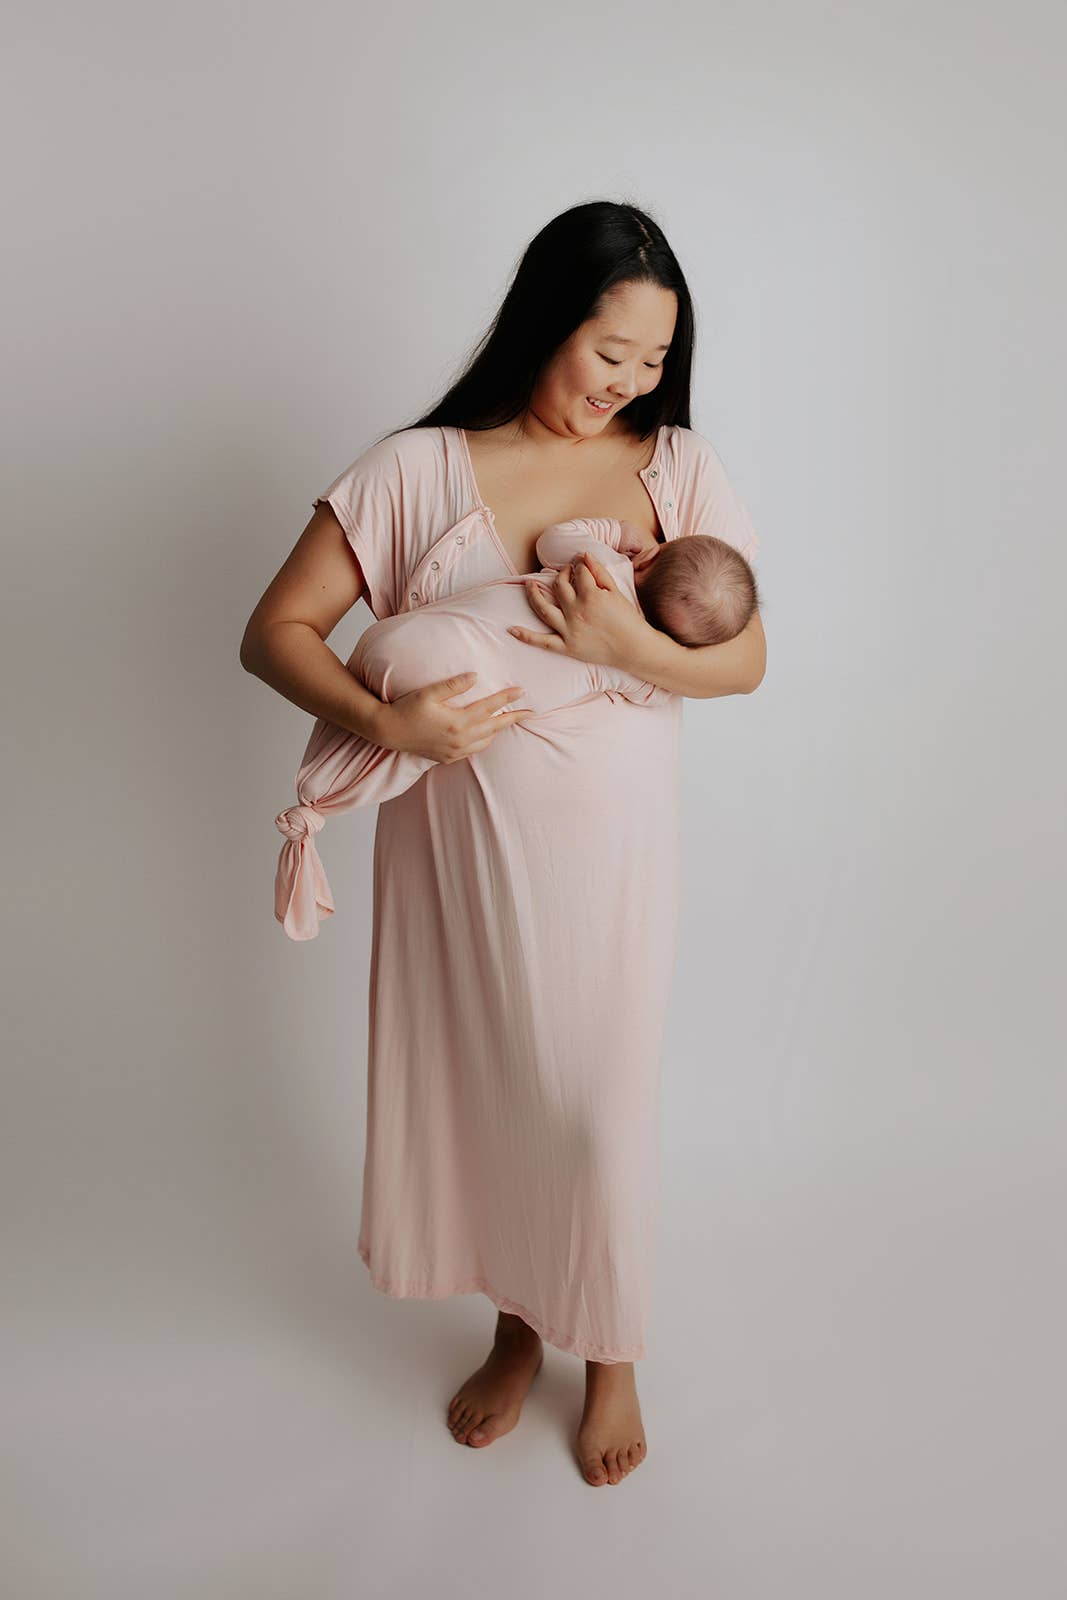 Labor, Delivery, & Nursing Gown - Heavenly Pink